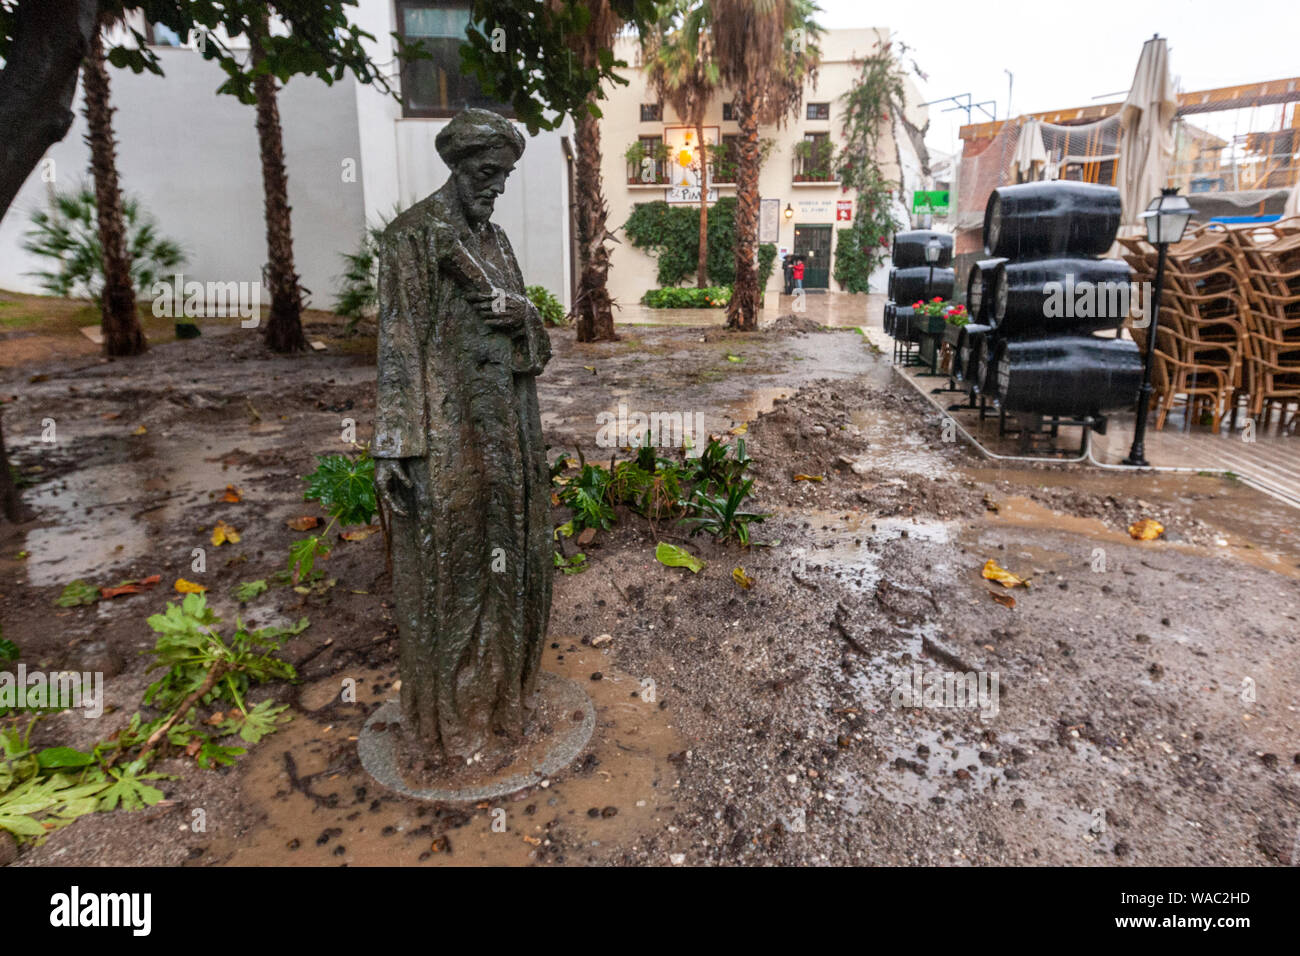 Statue in malaga hi-res stock photography and images - Alamy